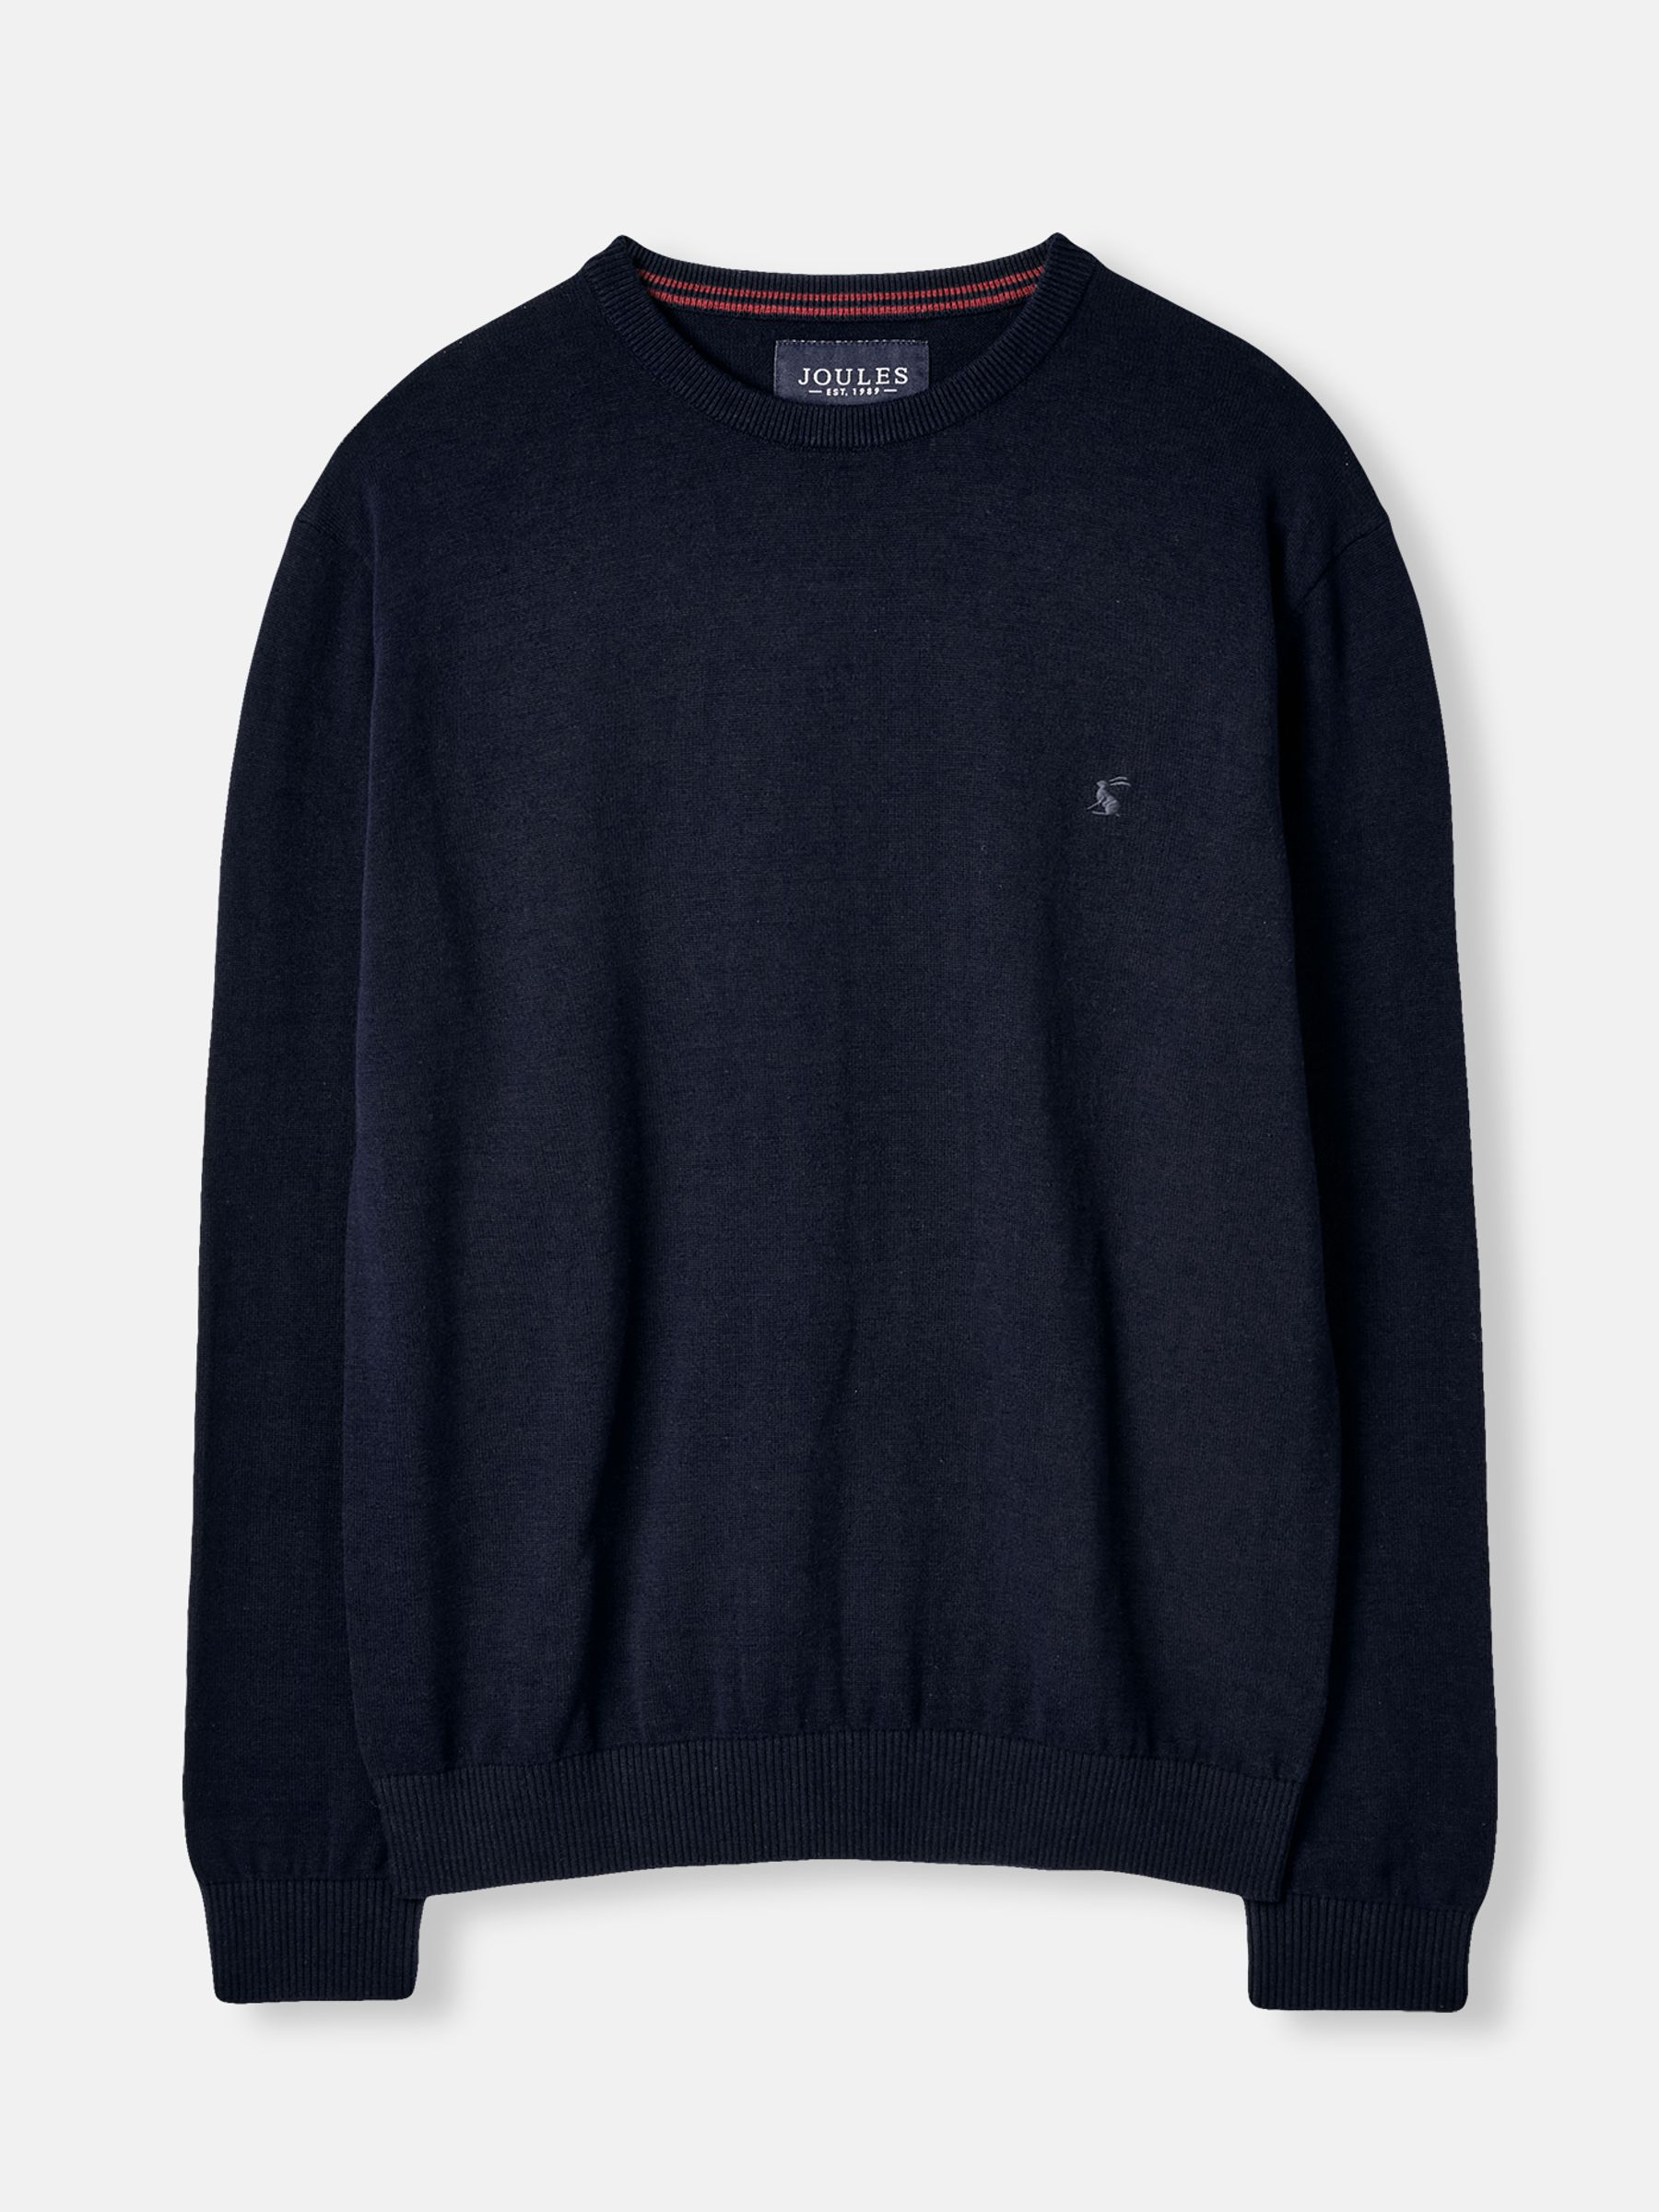 Buy Jarvis Navy Cotton Crew Neck Jumper from the Joules online shop